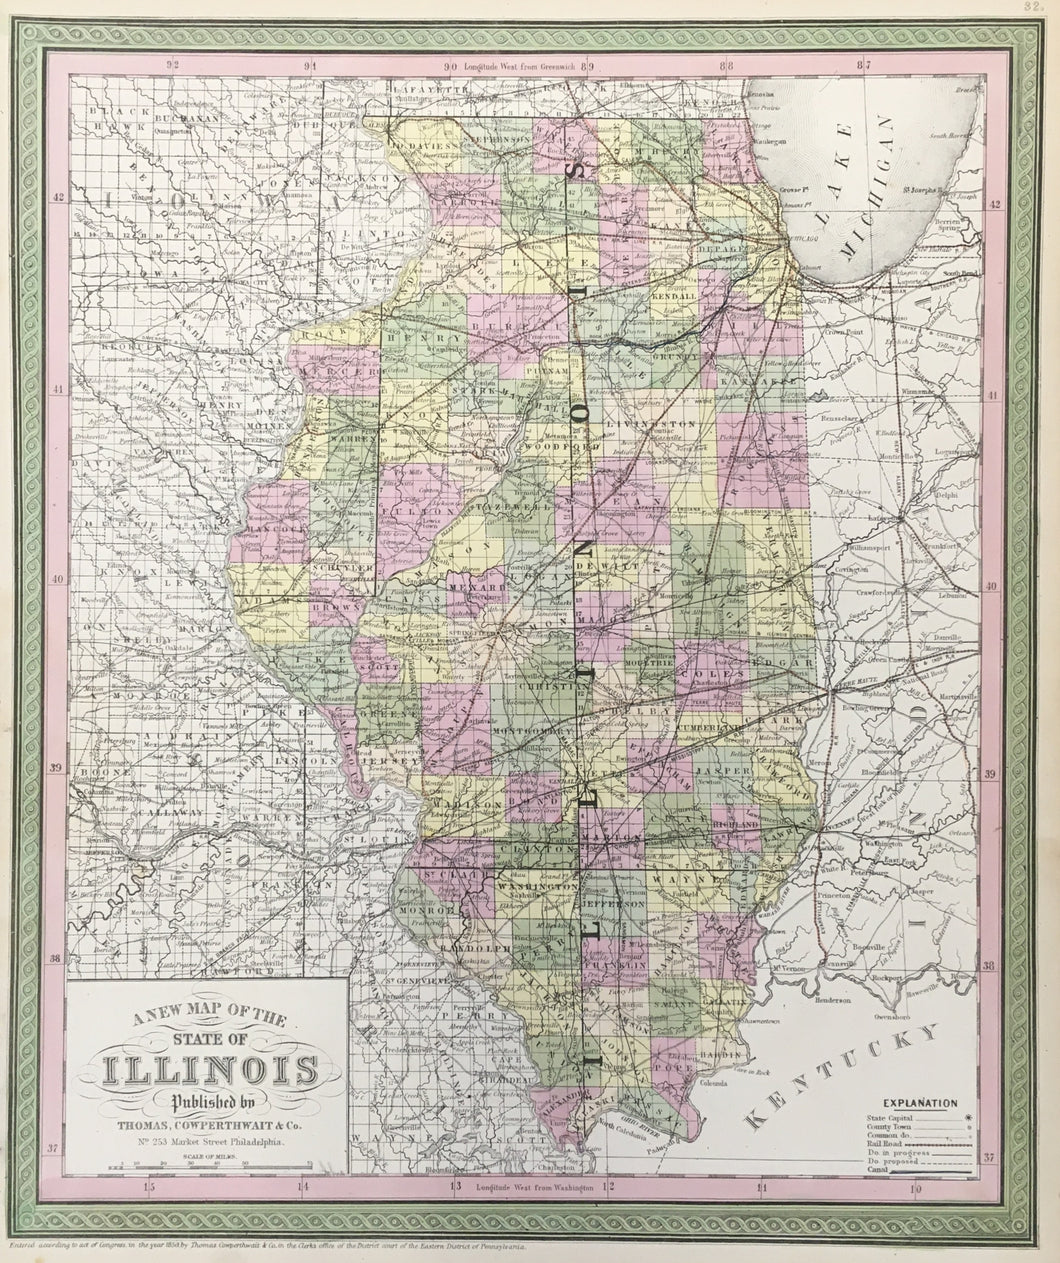 Mitchell, S. Augustus  “A New Map of Illinois